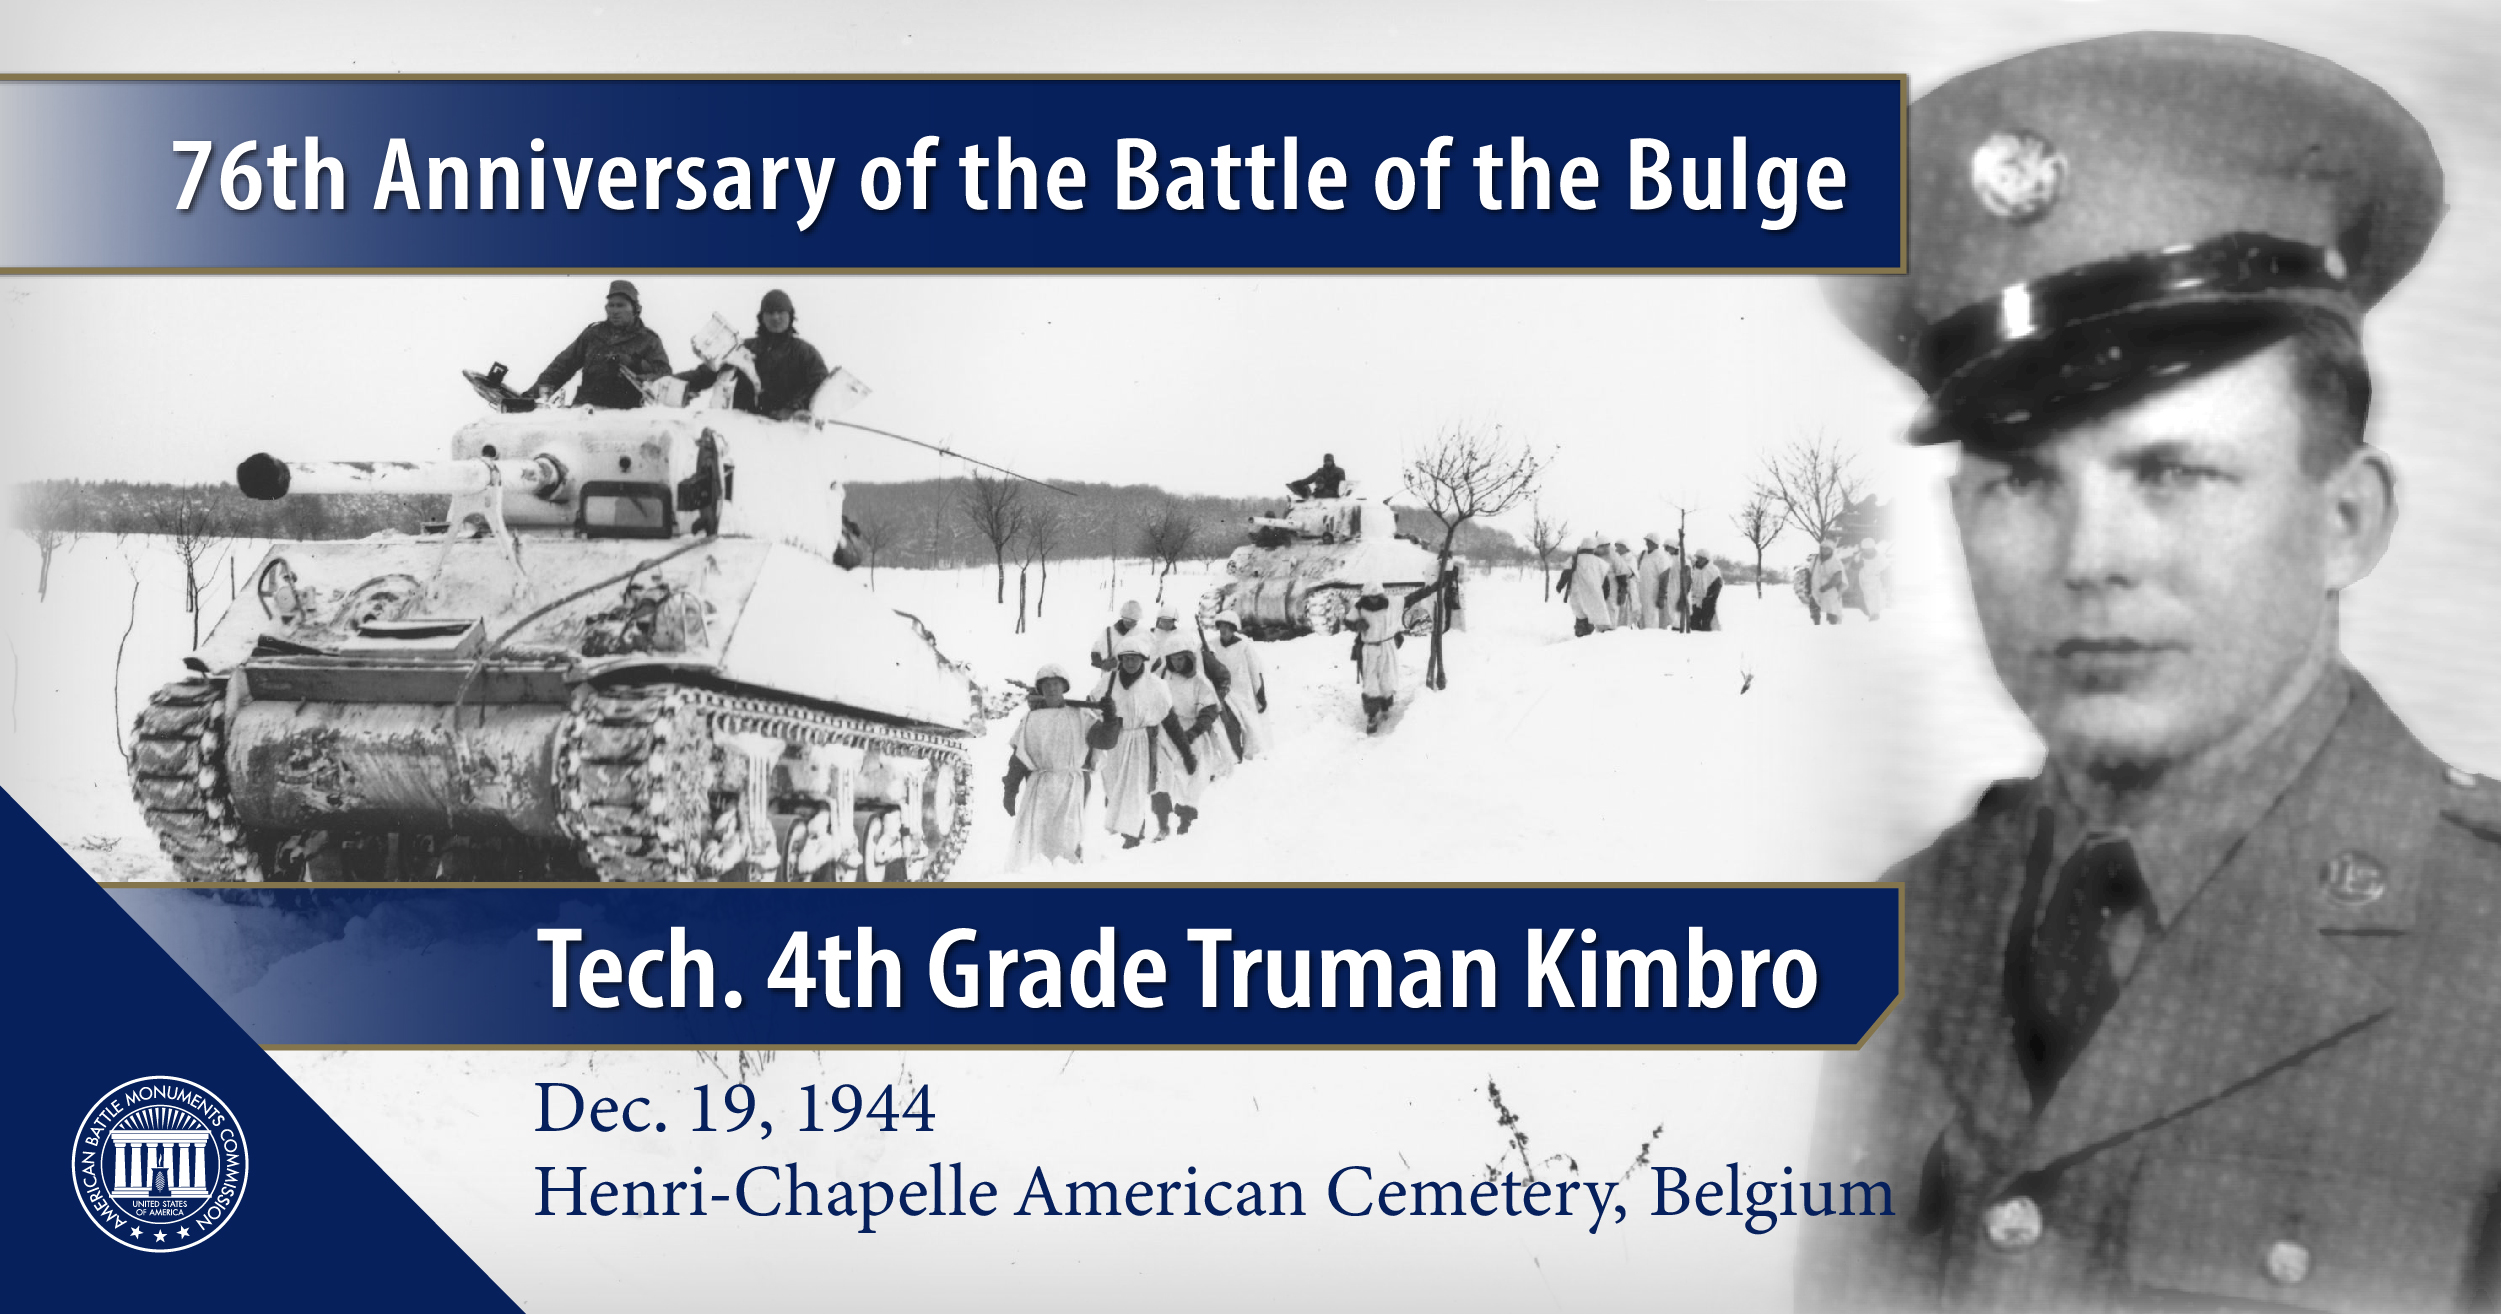 ABMC remembers Technician 4th Kimbro, buried at Henri-Chapelle American Cemetery